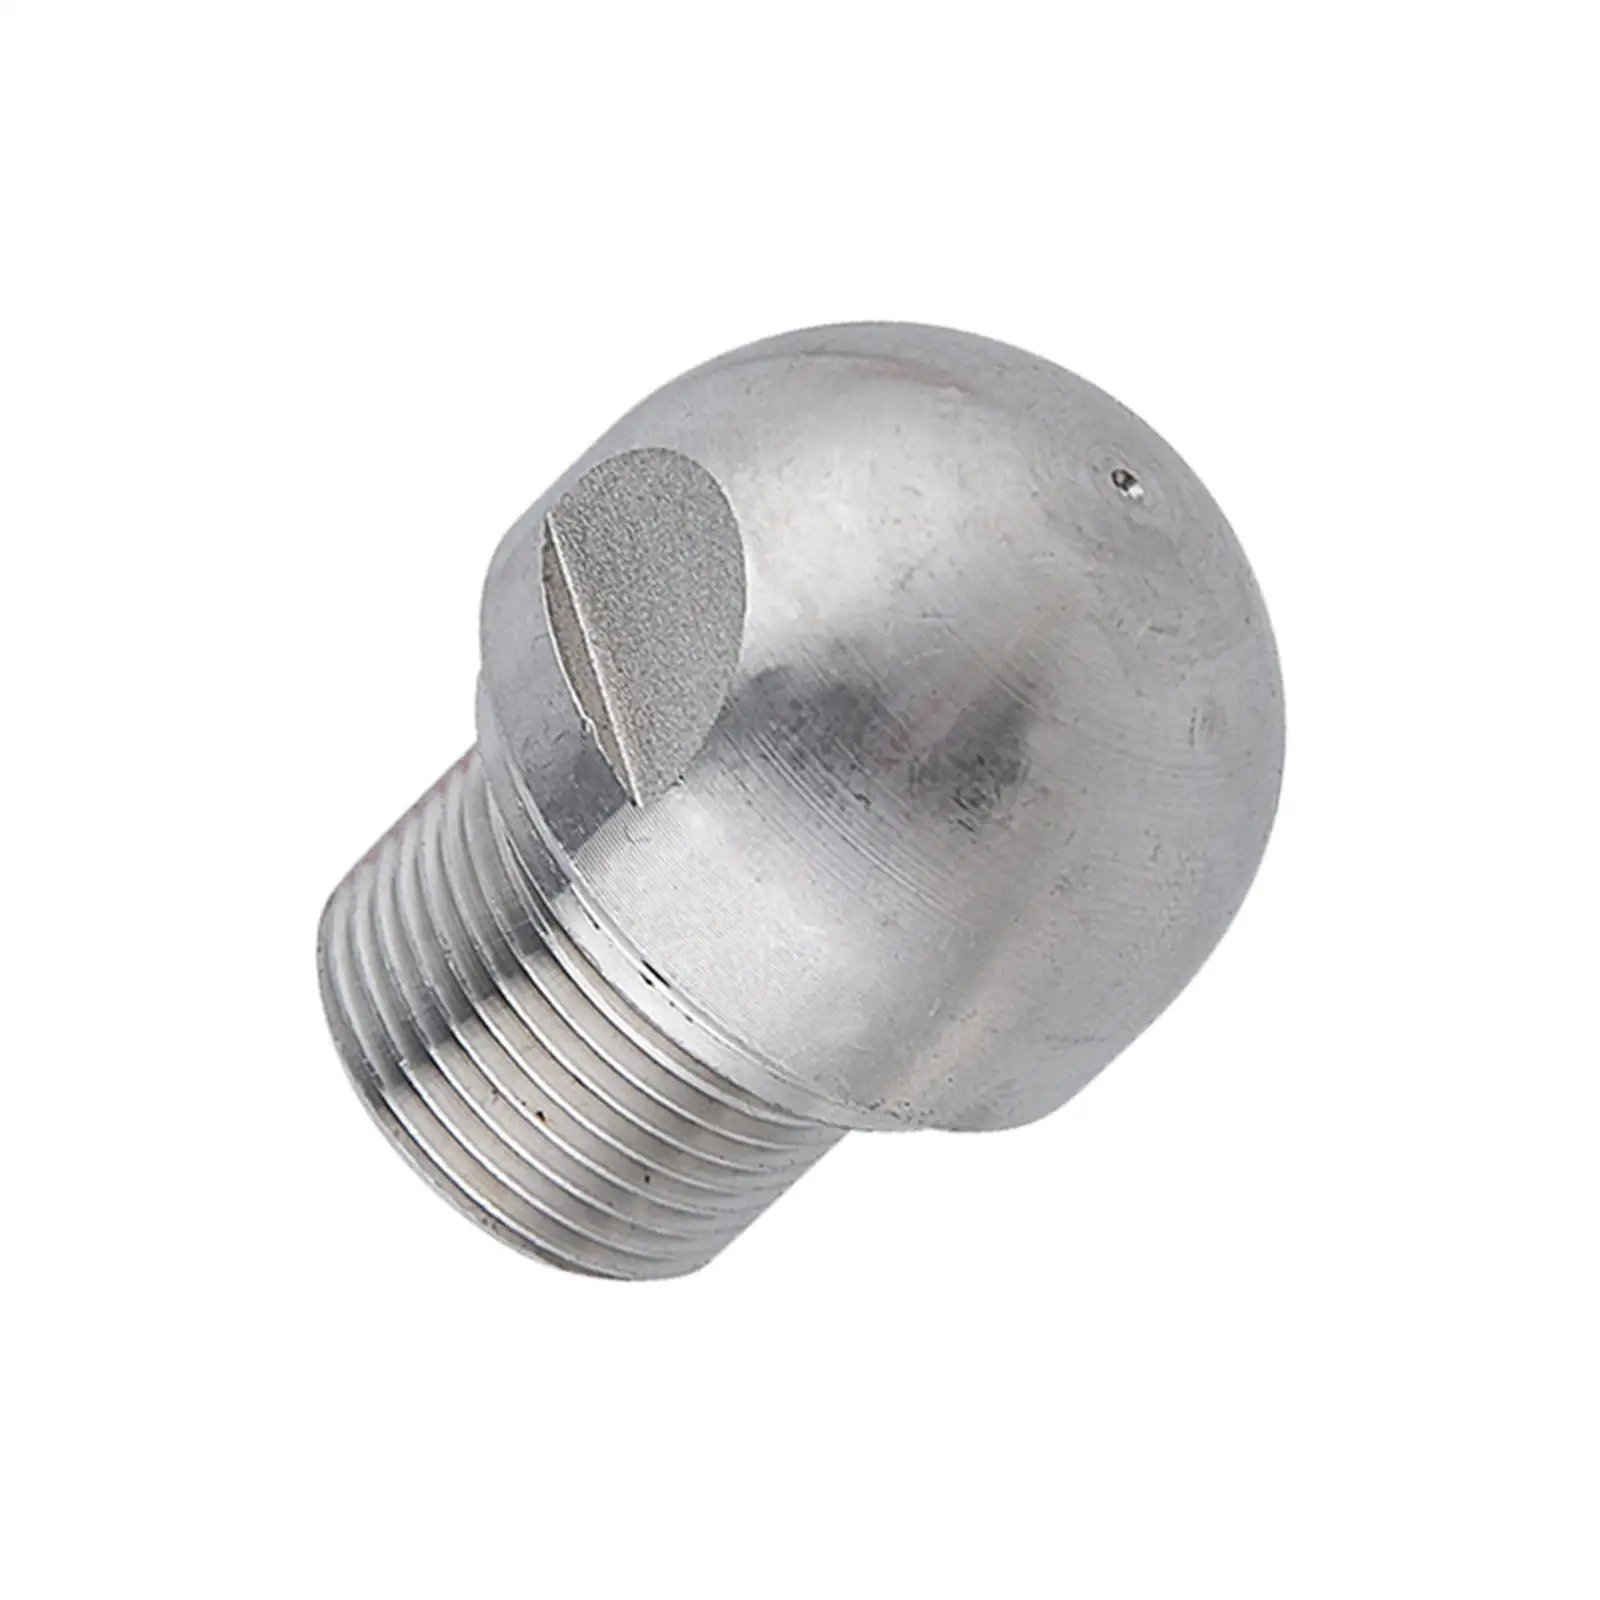 Drain Cleaning Nozzle Pressure Washer Quick Connector 1/4`` Quick Connect for Drain Jetting Hose High Pressure Washer Accessory